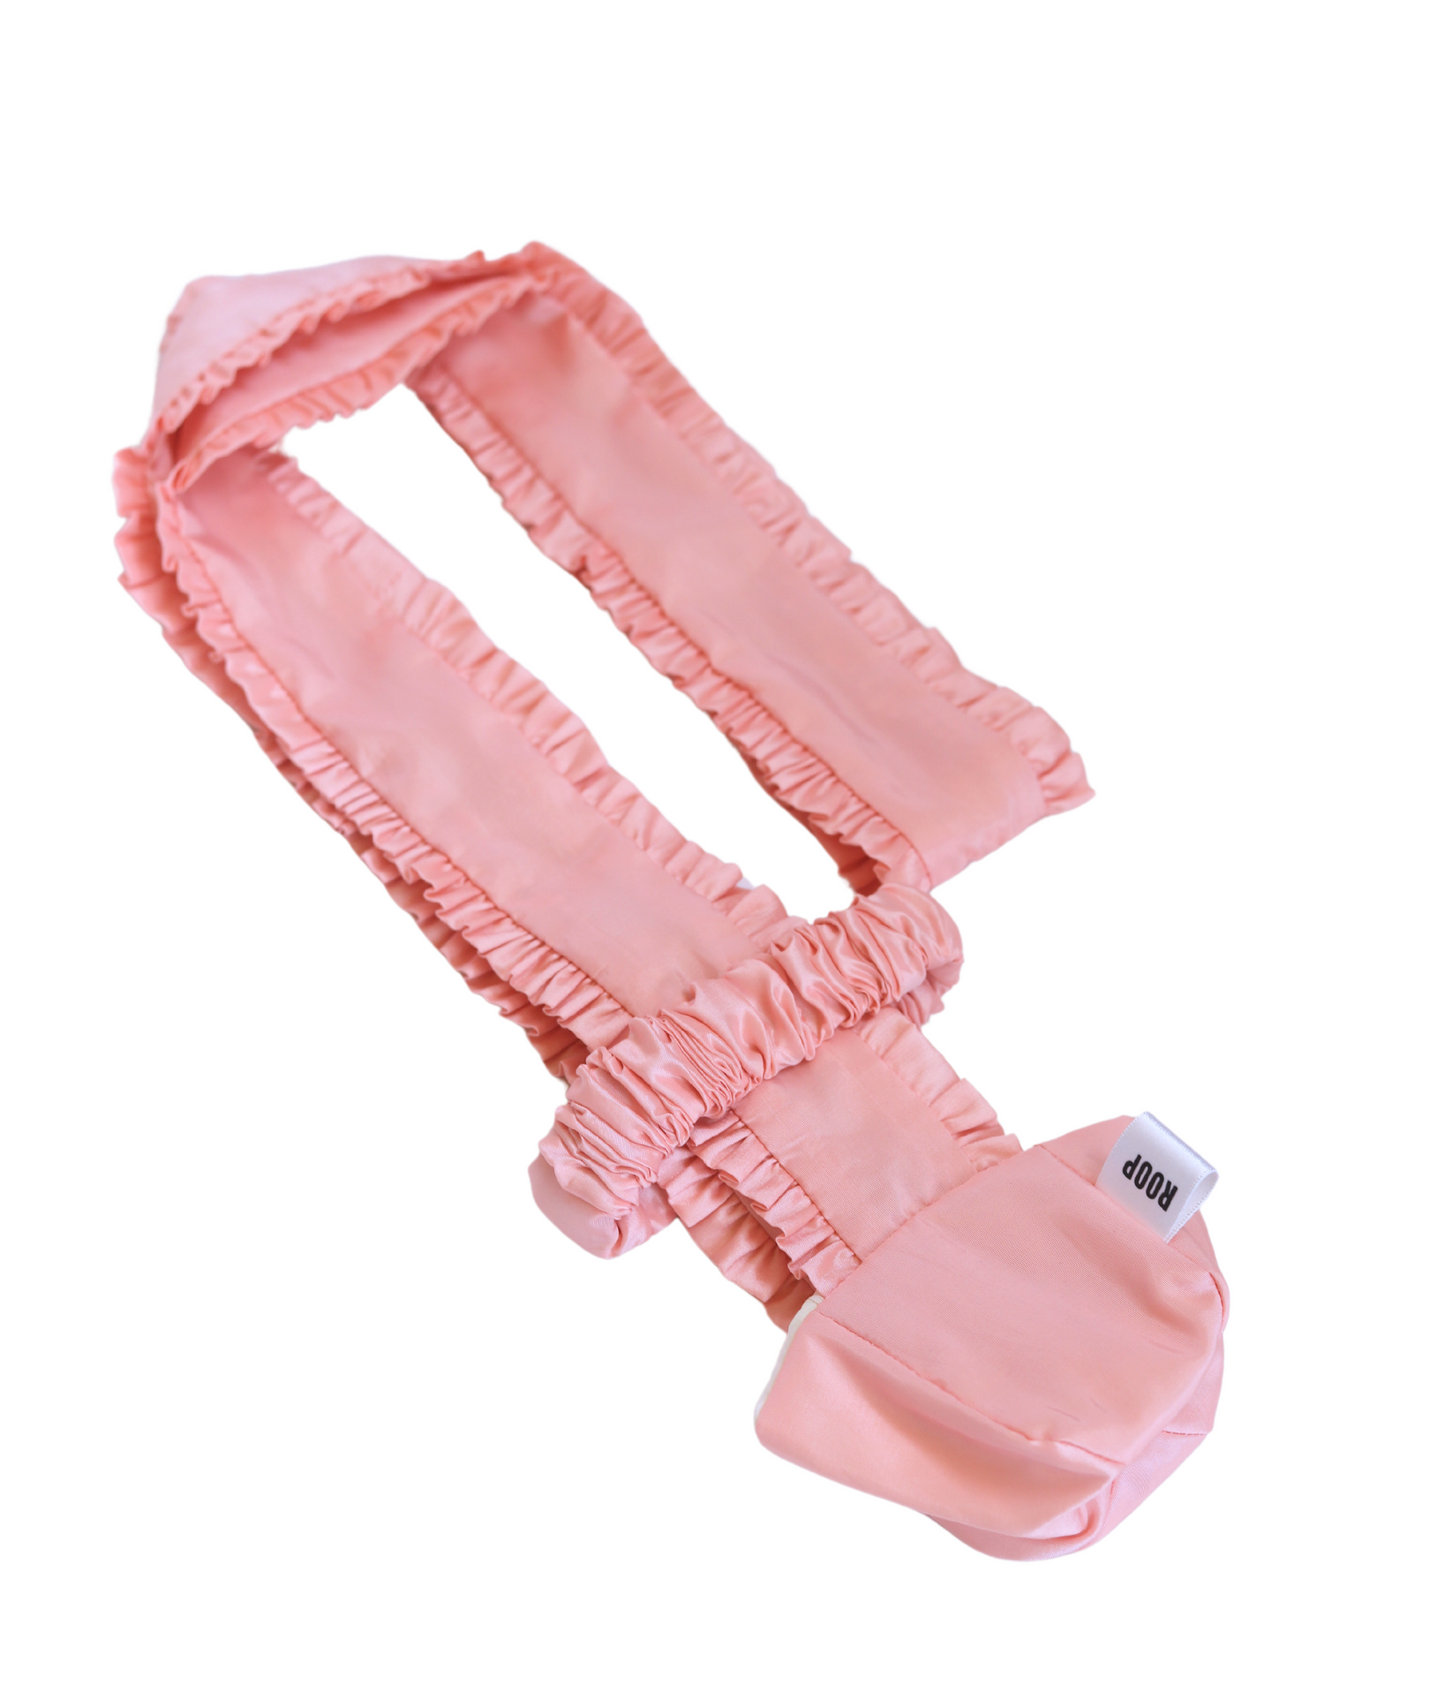 Crossbody bottle bag in pink with ruffles